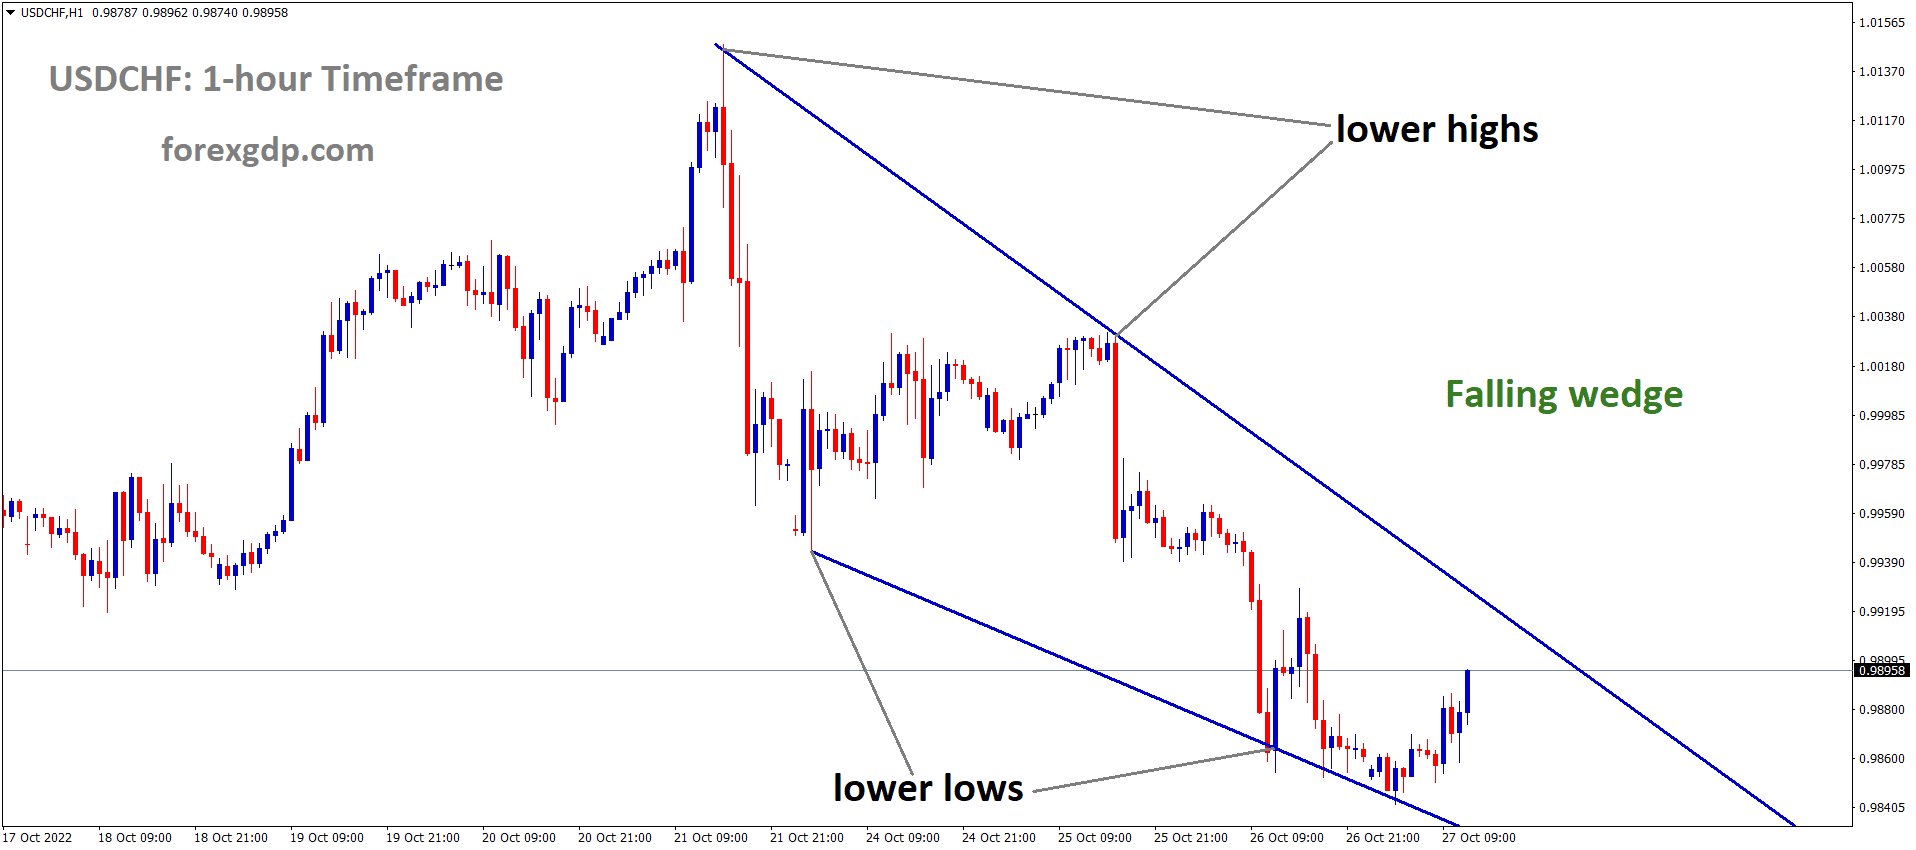 USDCHF is moving in the Falling wedge Pattern and the market has rebounded from the lower low area of the pattern